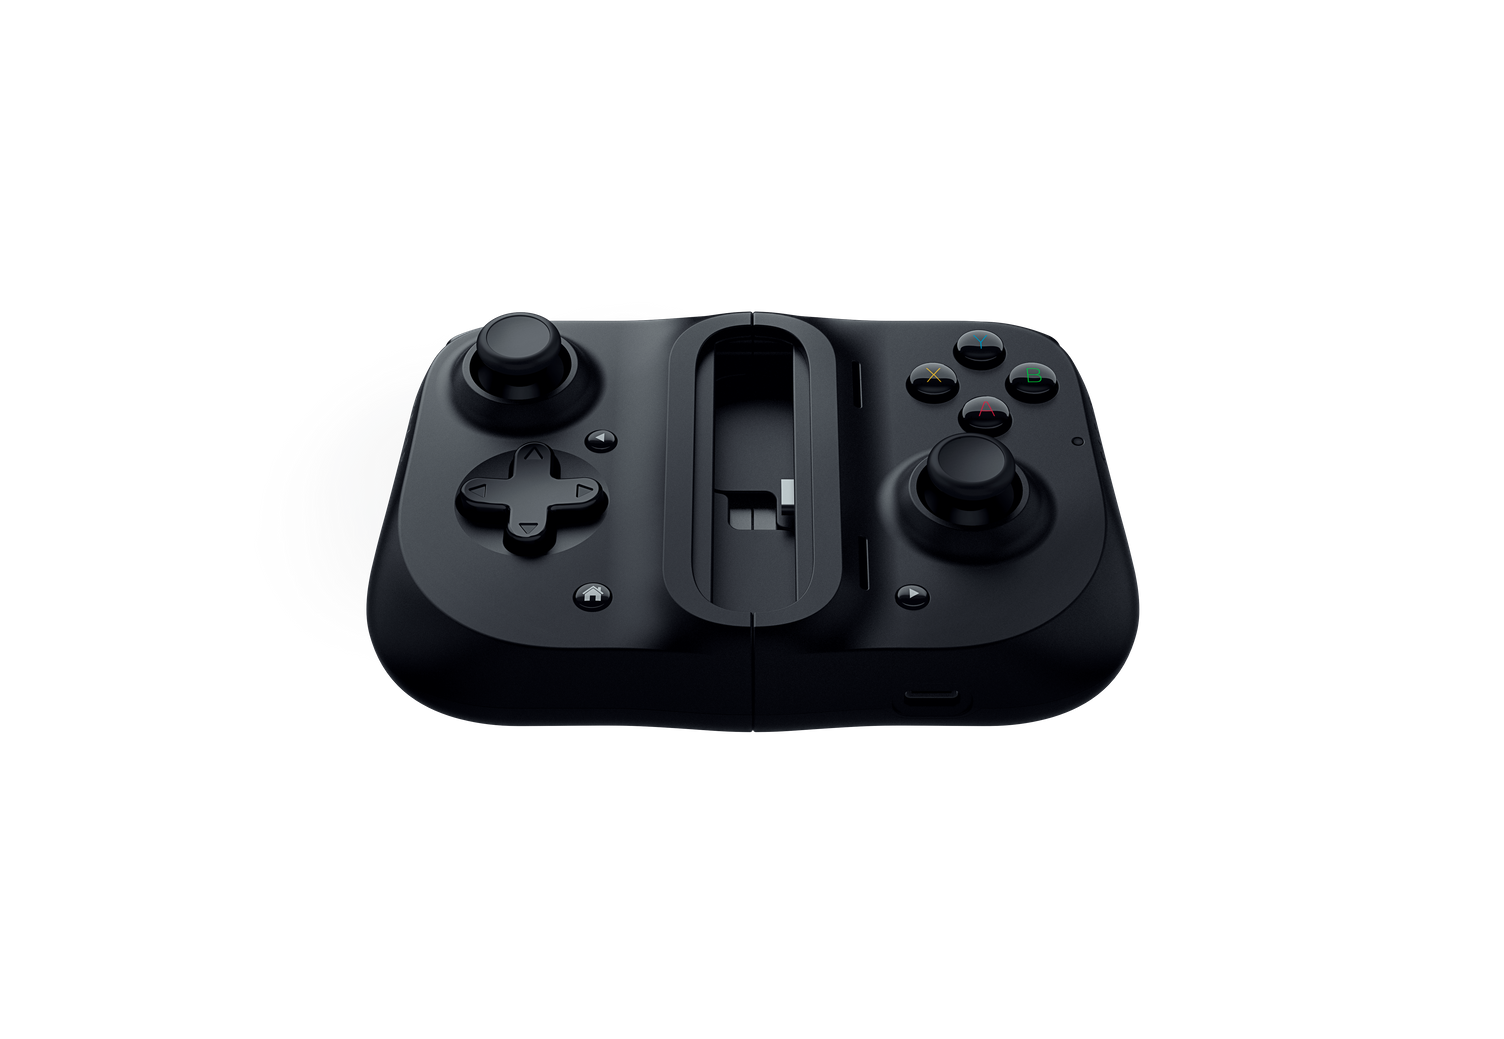 Razer Mobile Gaming Bundle - Includes Kishi for Android and Hammerhead True Wireless Headphones - image 5 of 7